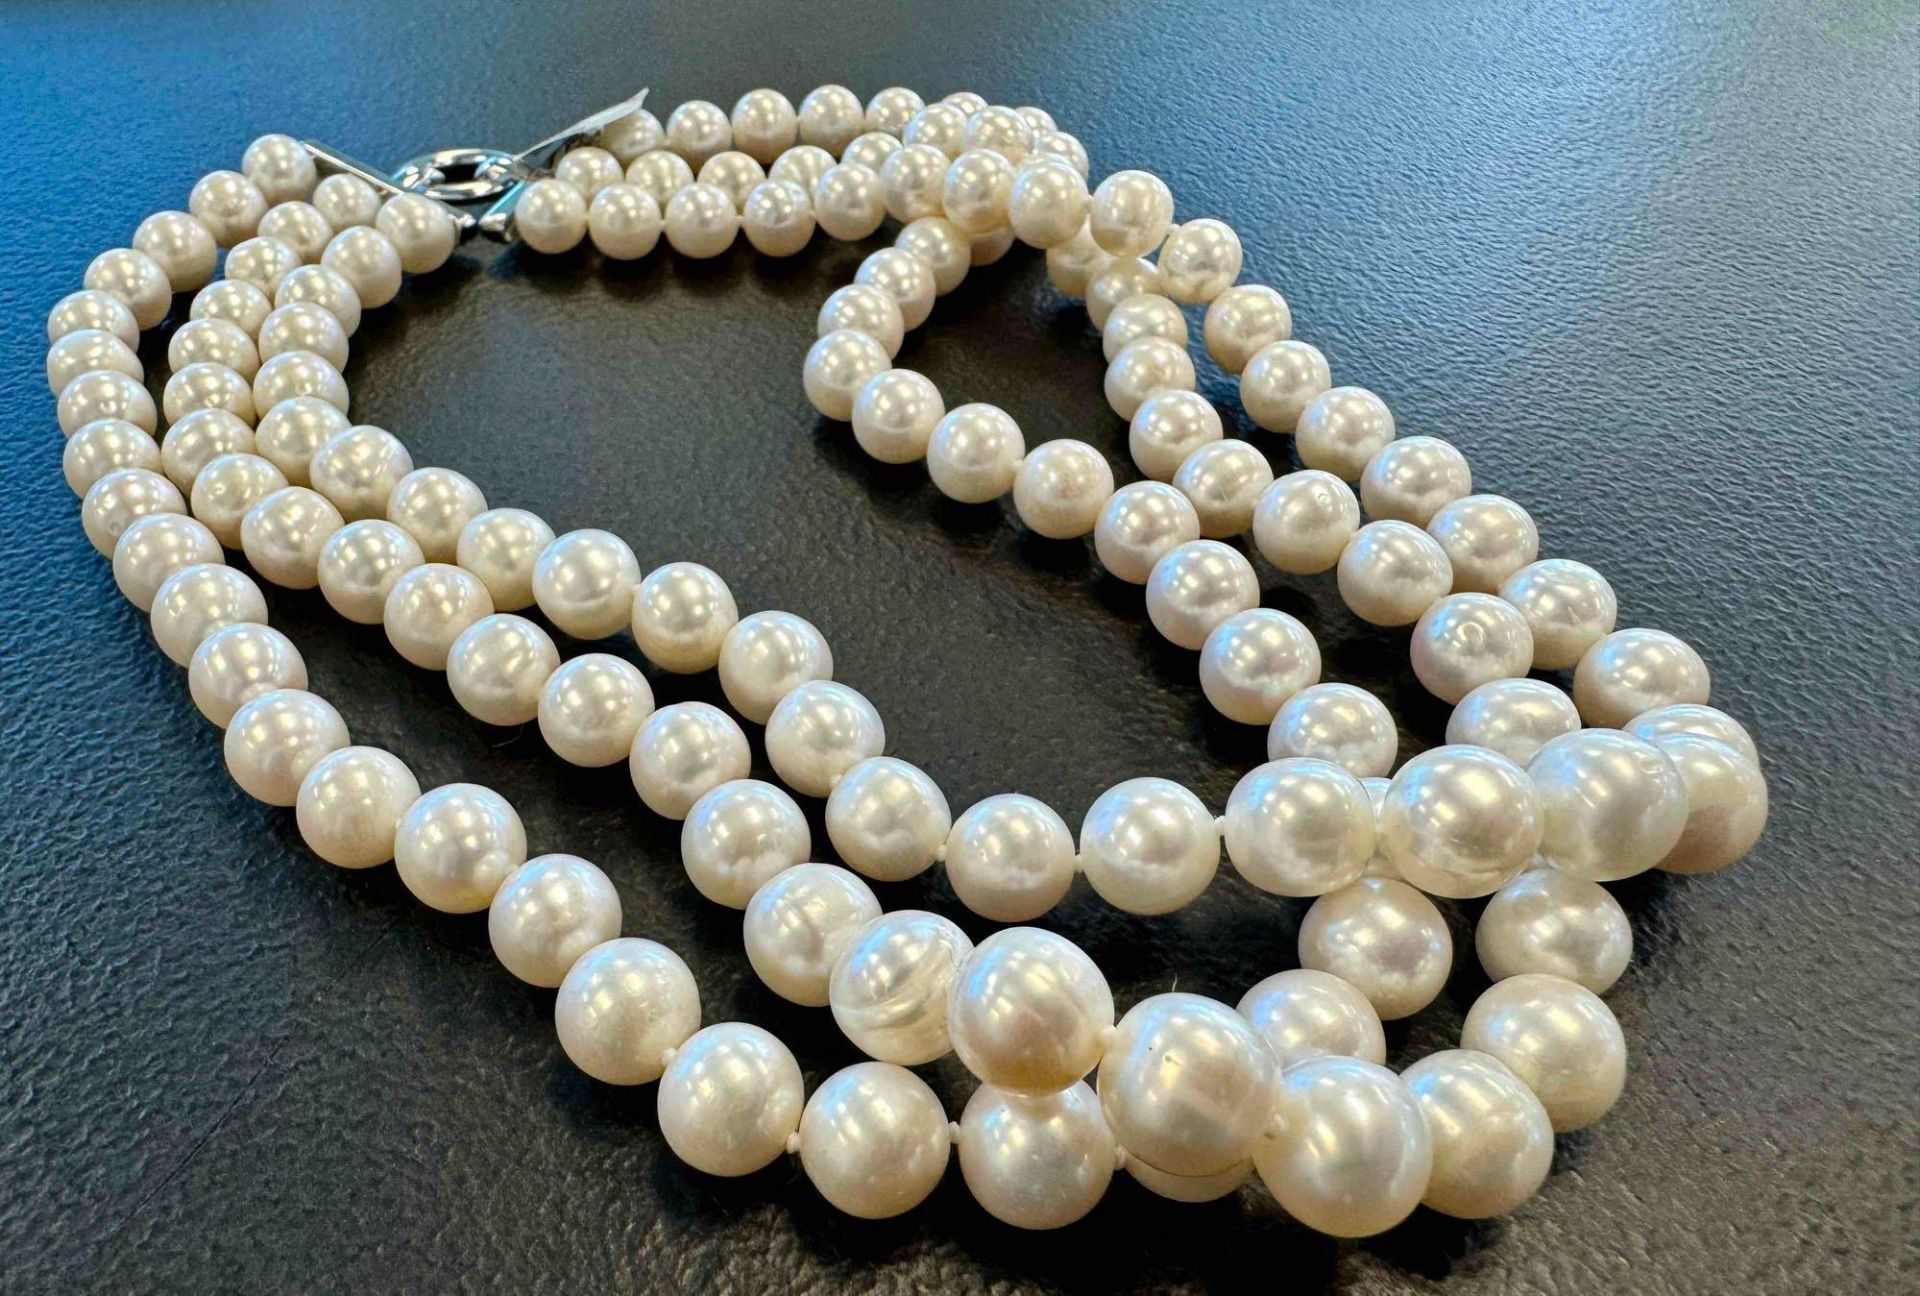 3 Strand Pearl Necklaces $1200 Retail - Image 5 of 5